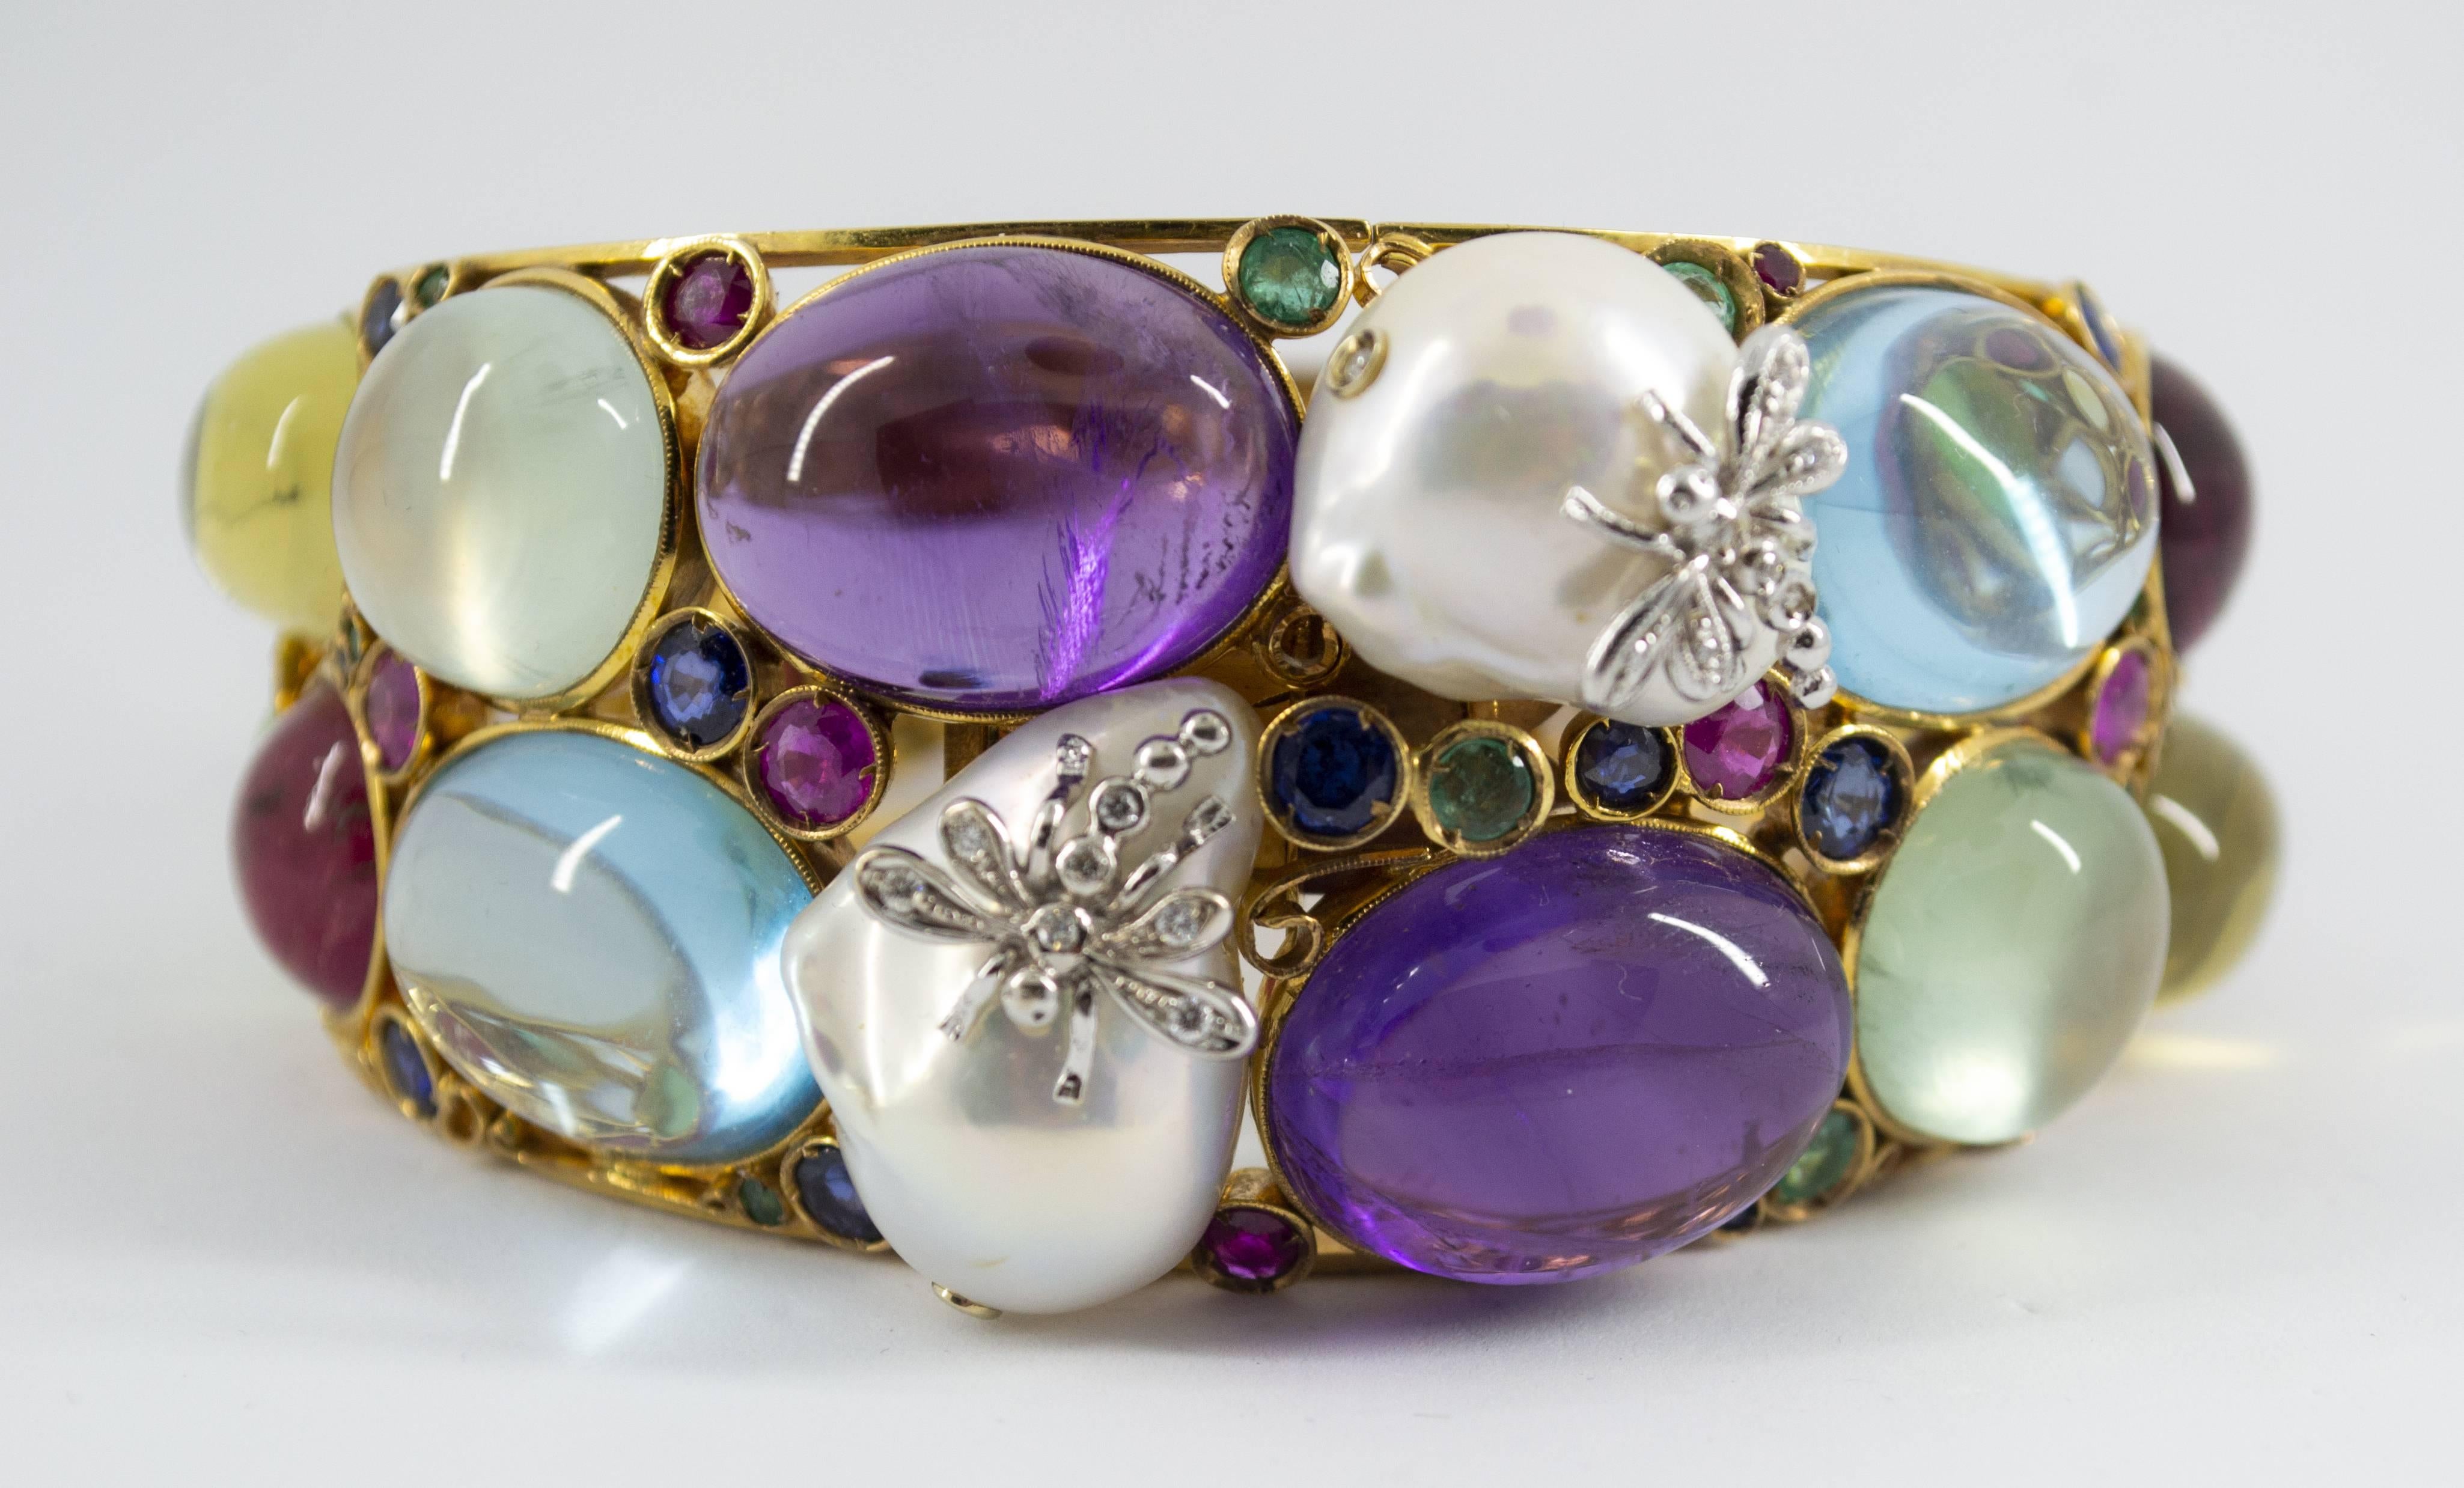 This Bracelet is made of 9K Yellow Gold.
This Bracelet has 0.15 of White Diamond.
This Bracelet has 6.30 Carats of Emeralds, Rubies and Sapphires.
This Bracelet has also Amethyst, Citrine, Topaz, Tourmaline, Pearl.
We're a workshop so every piece is